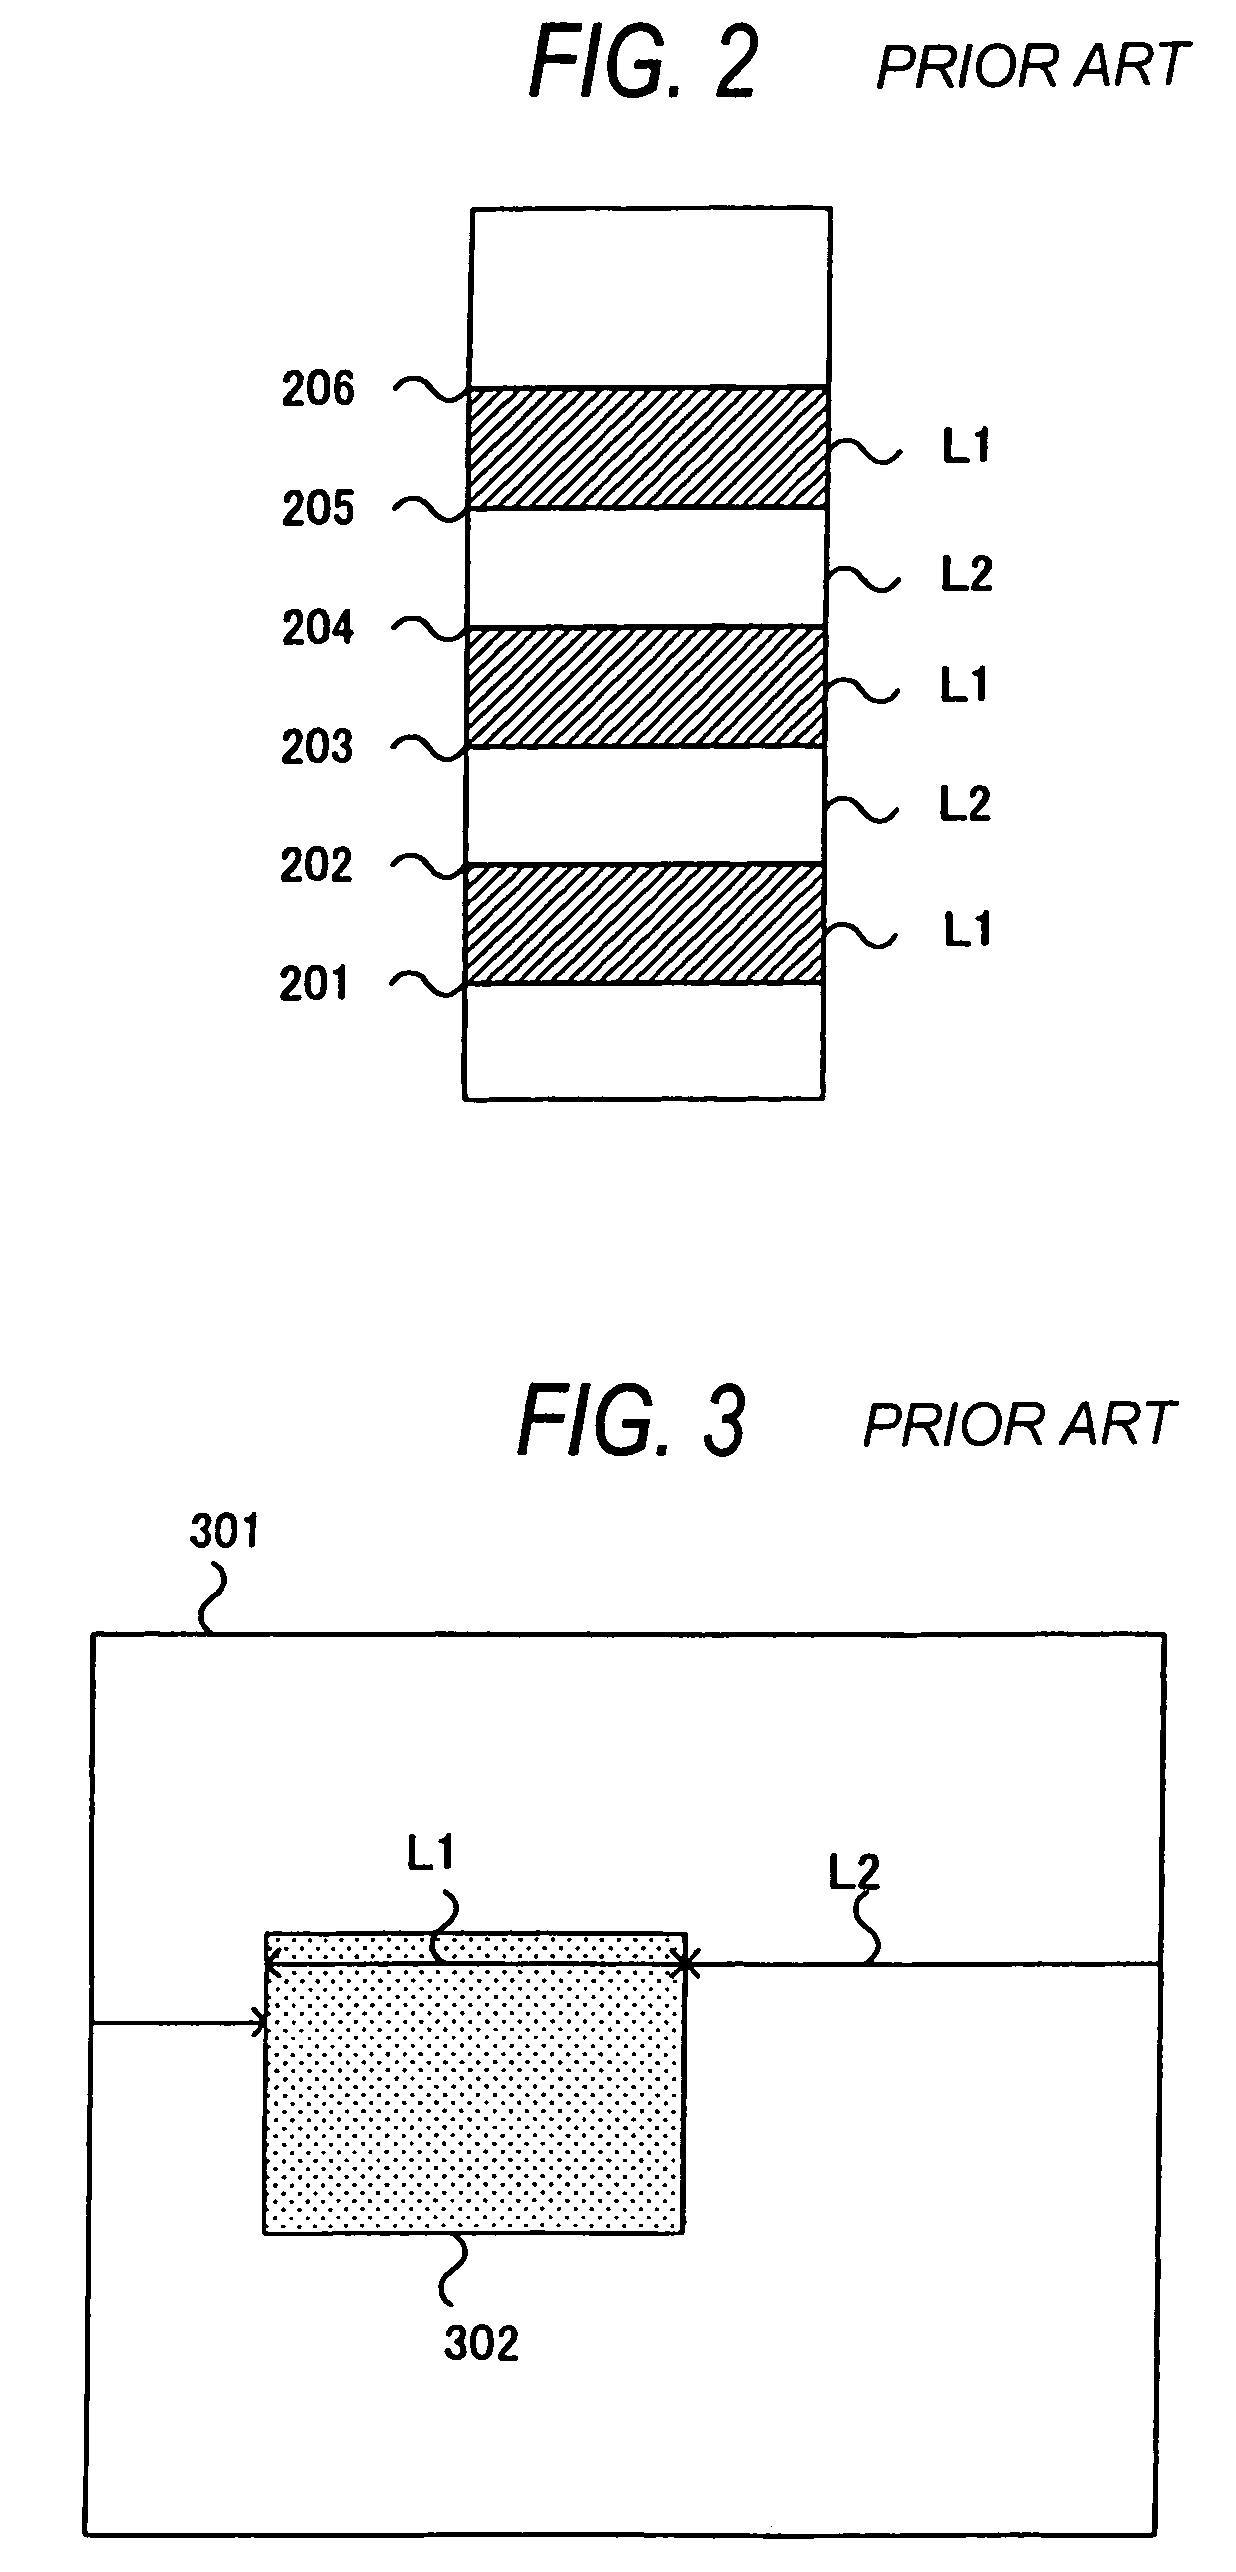 DMA controller providing for ring buffer and rectangular block transfers